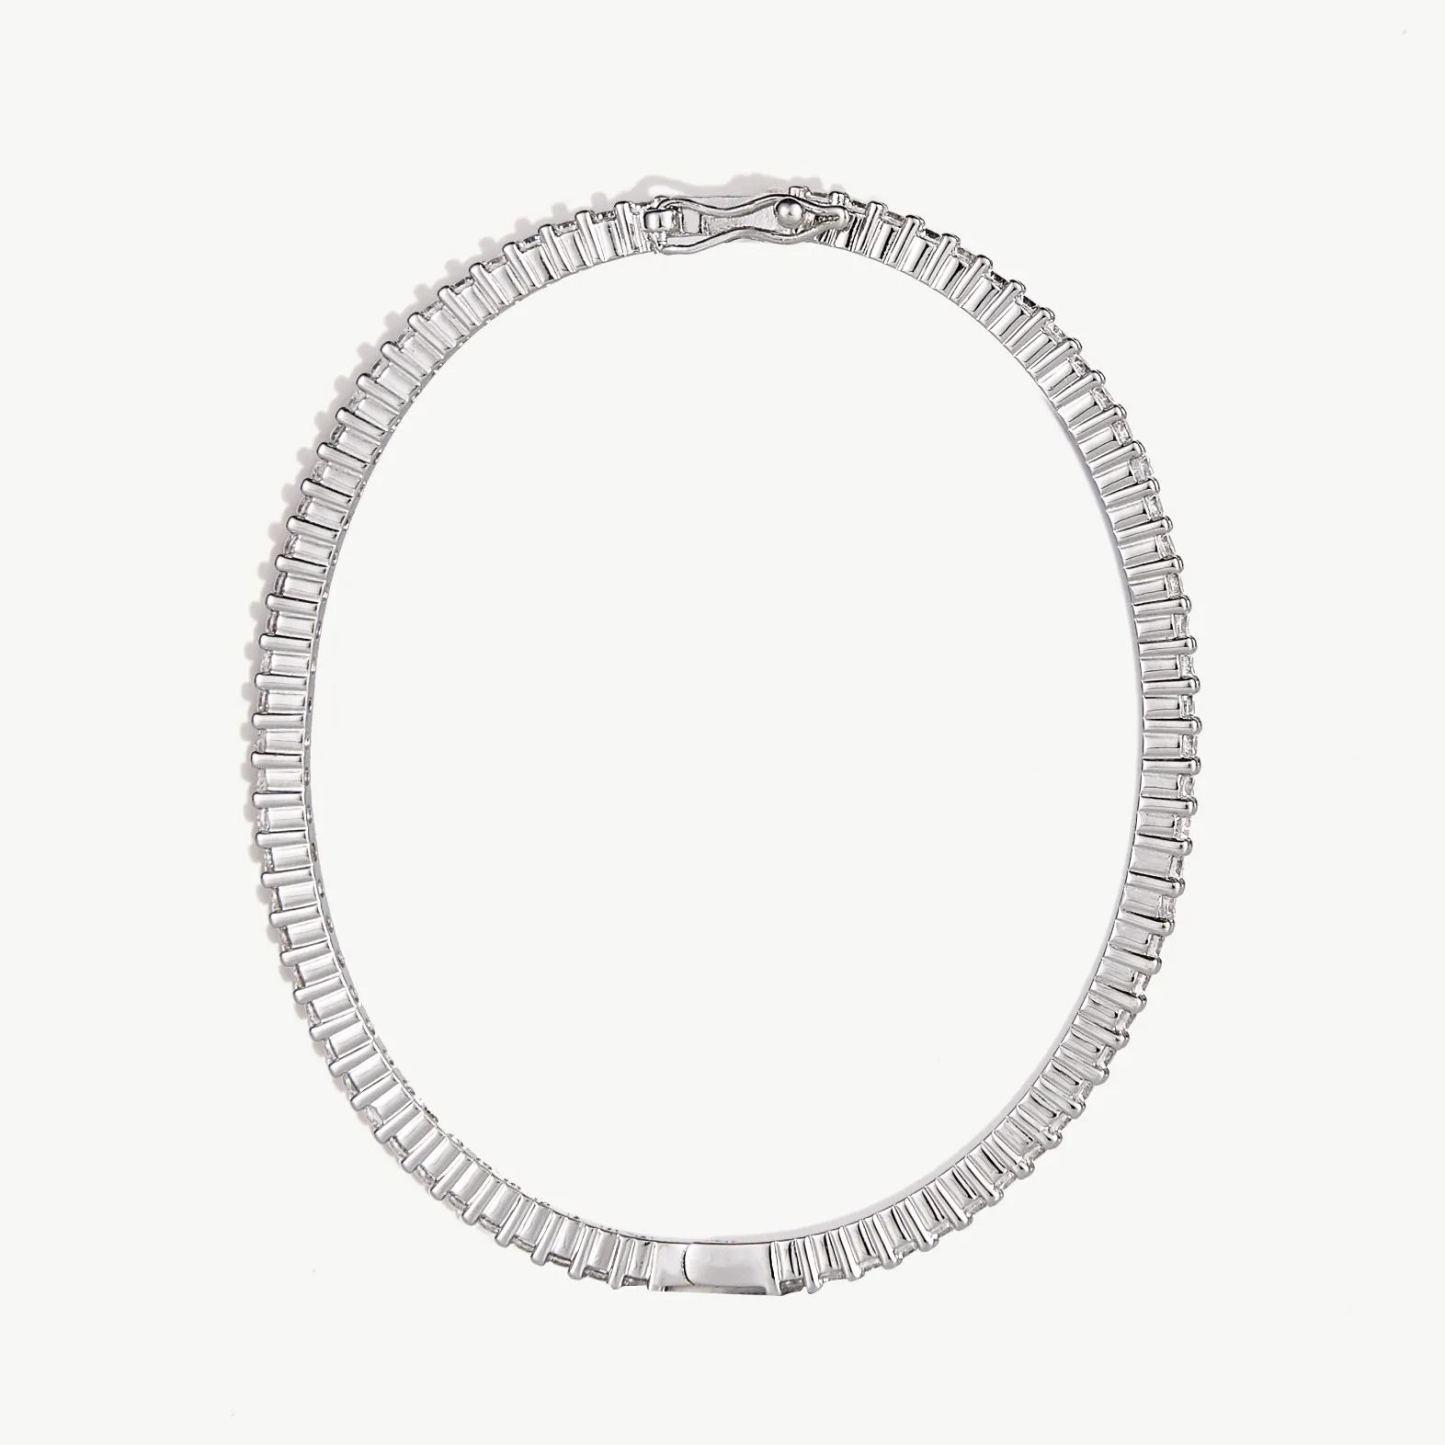 Luxe Elegance in Motion Hinged Bangle